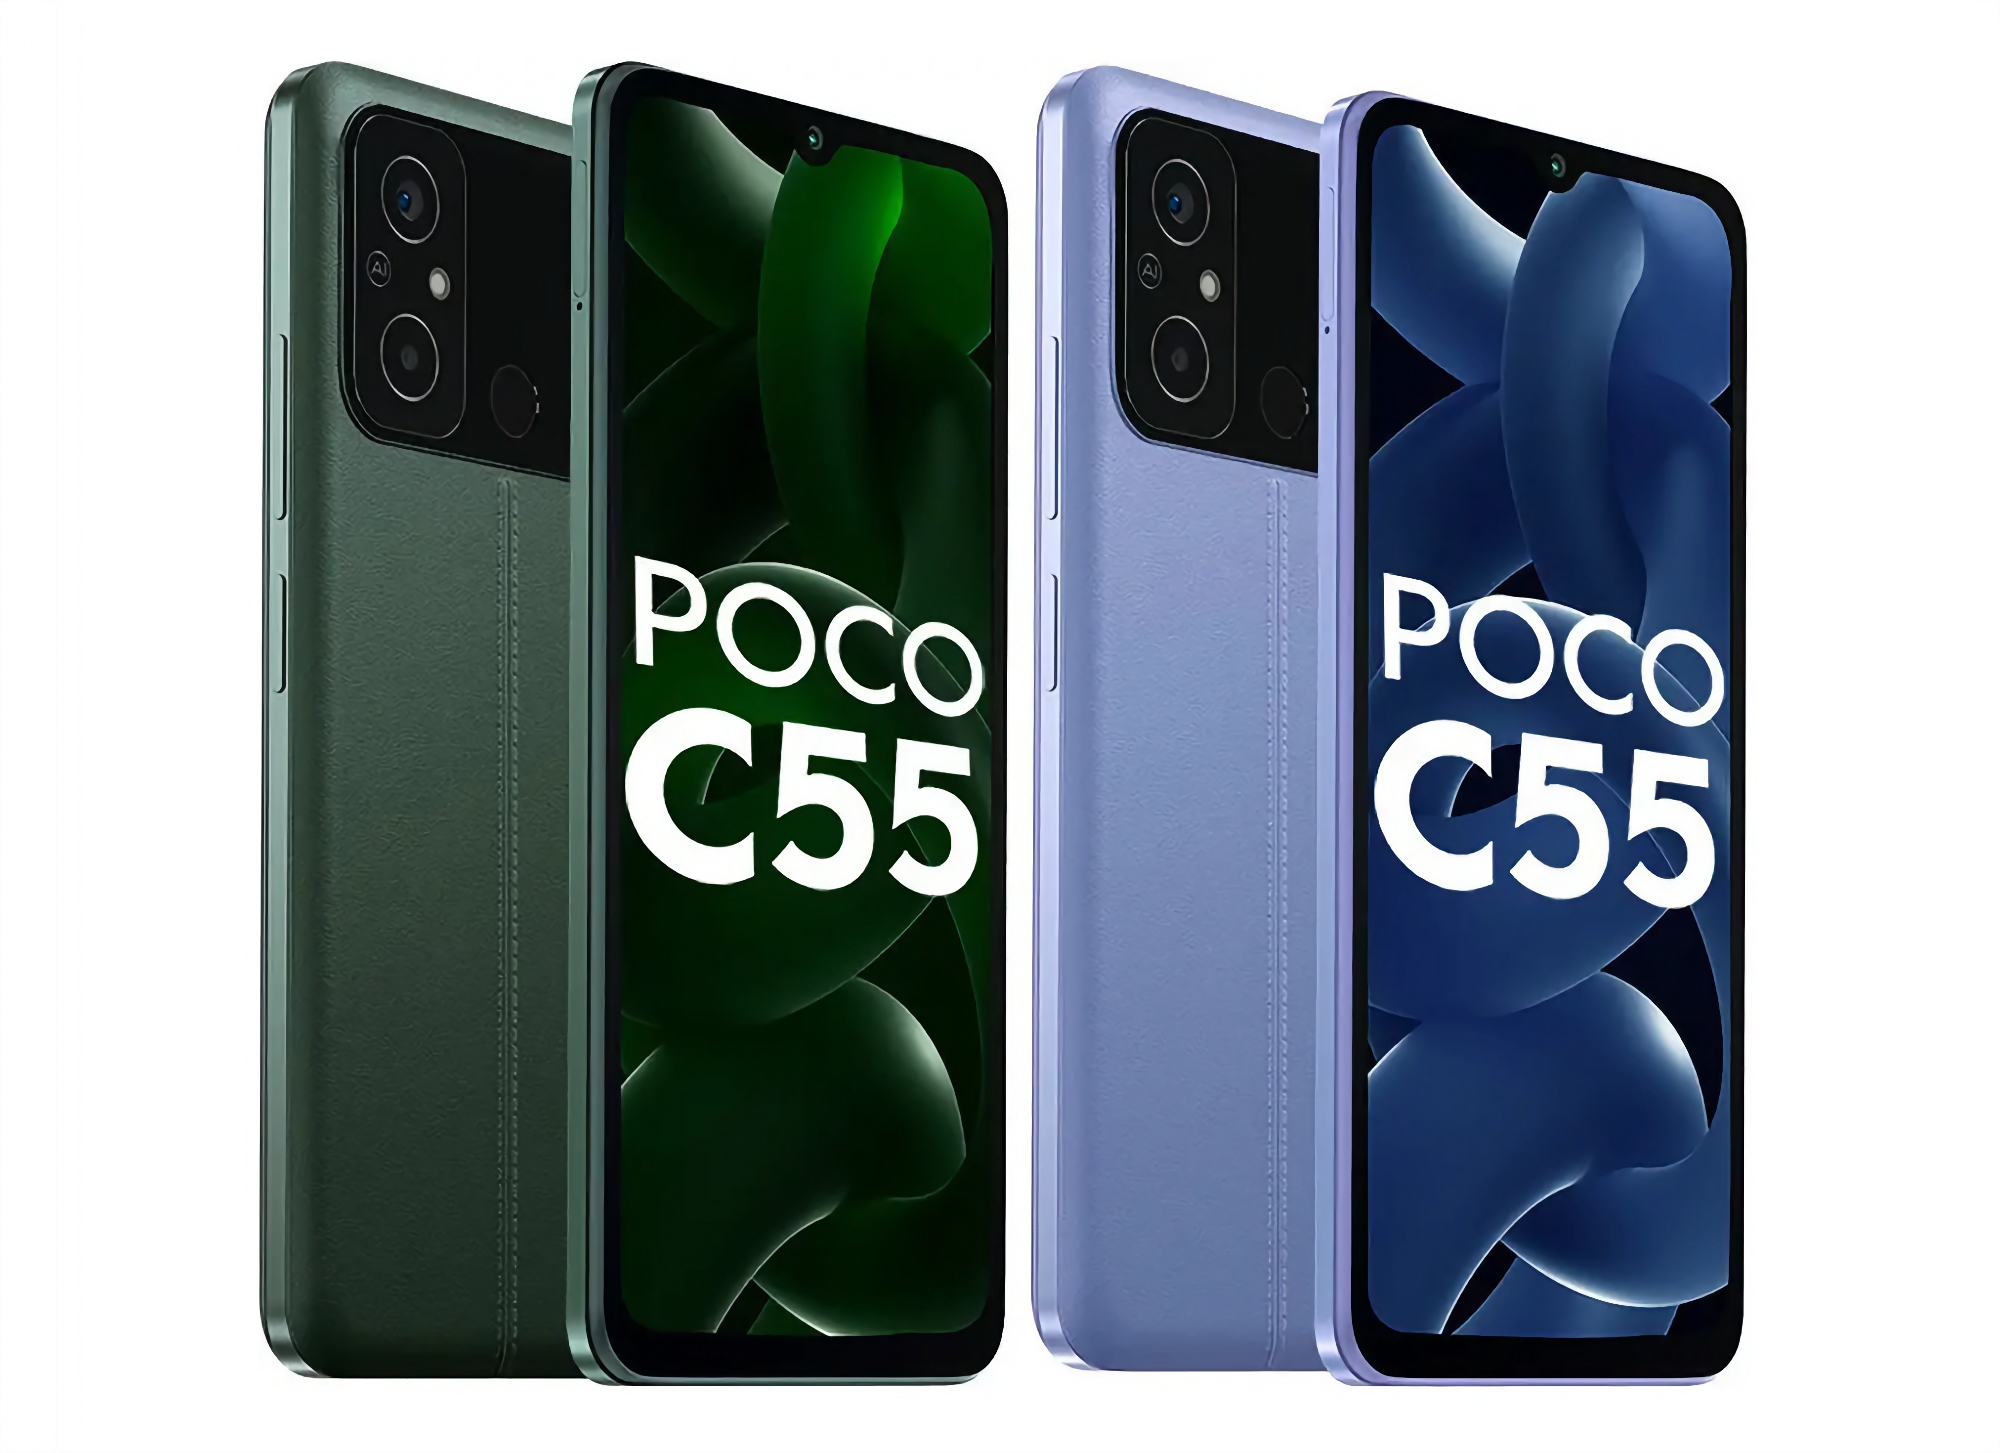 Confirmed: POCO C55 with MediaTek Helio G85 chip, IP52 protection and 5000mAh battery will hit the global market